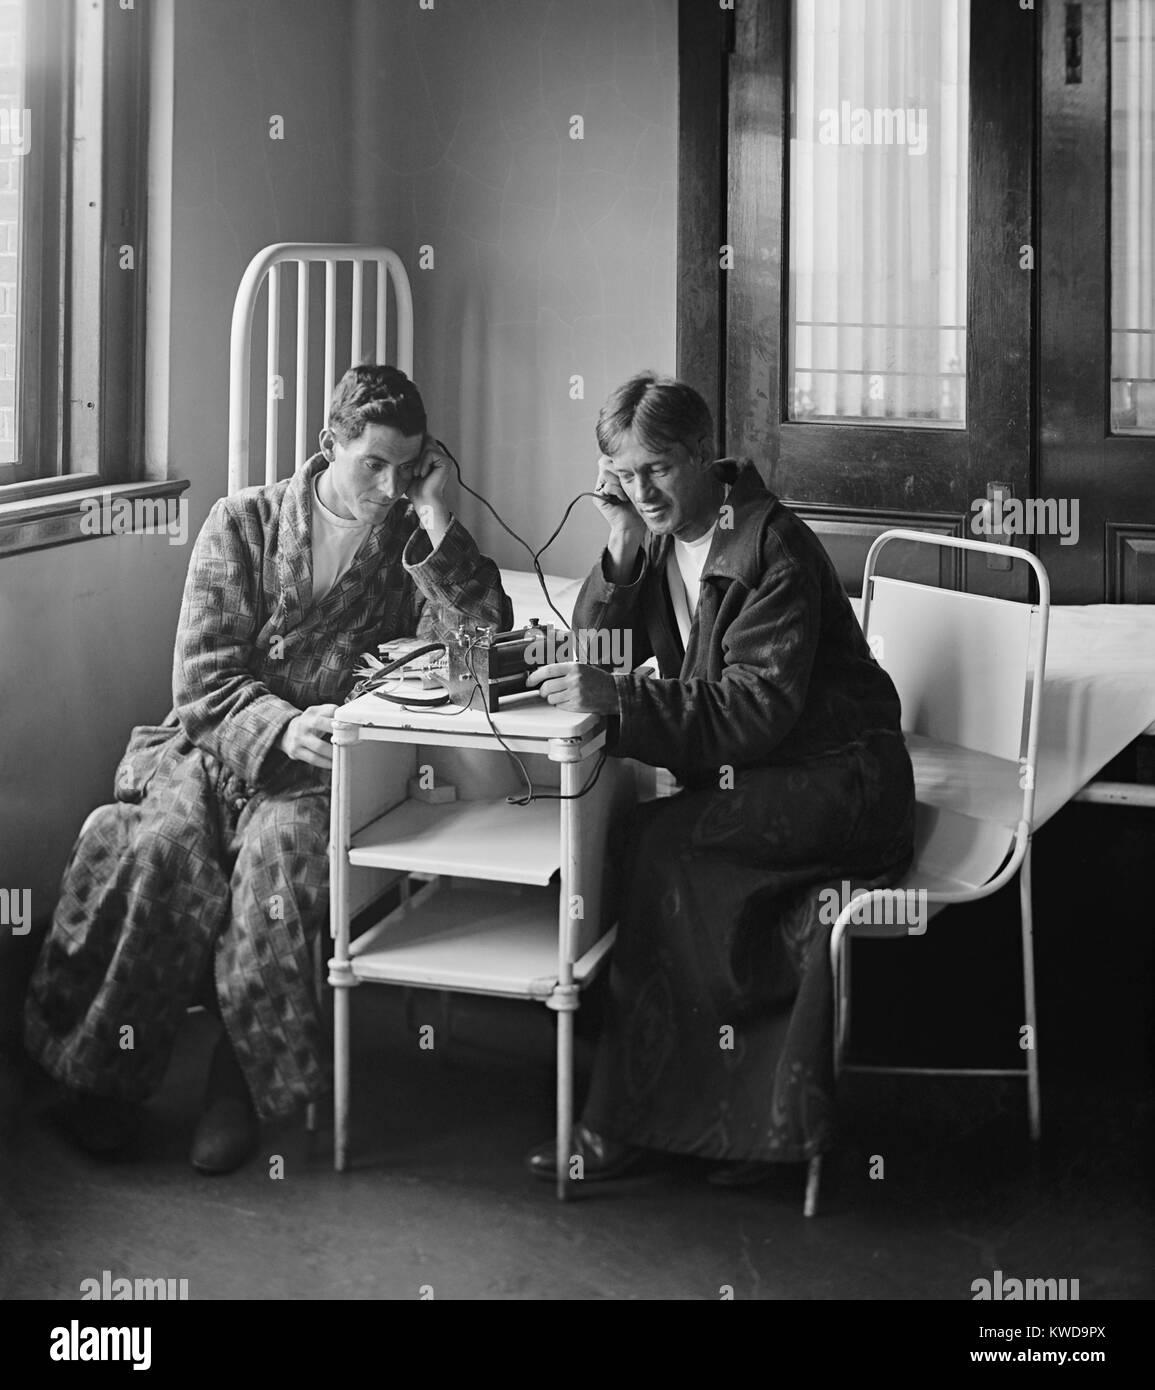 Patients in bathrobes listening to a radio at Garfield Hospital, in 1924. Radio entertained many and eased the isolation of those confined by illness. Garfield Hospital was located on Florida Avenue NW between 10th and 11th streets, Washington, D.C., from 1884-1958 (BSLOC 2016 10 54) Stock Photo